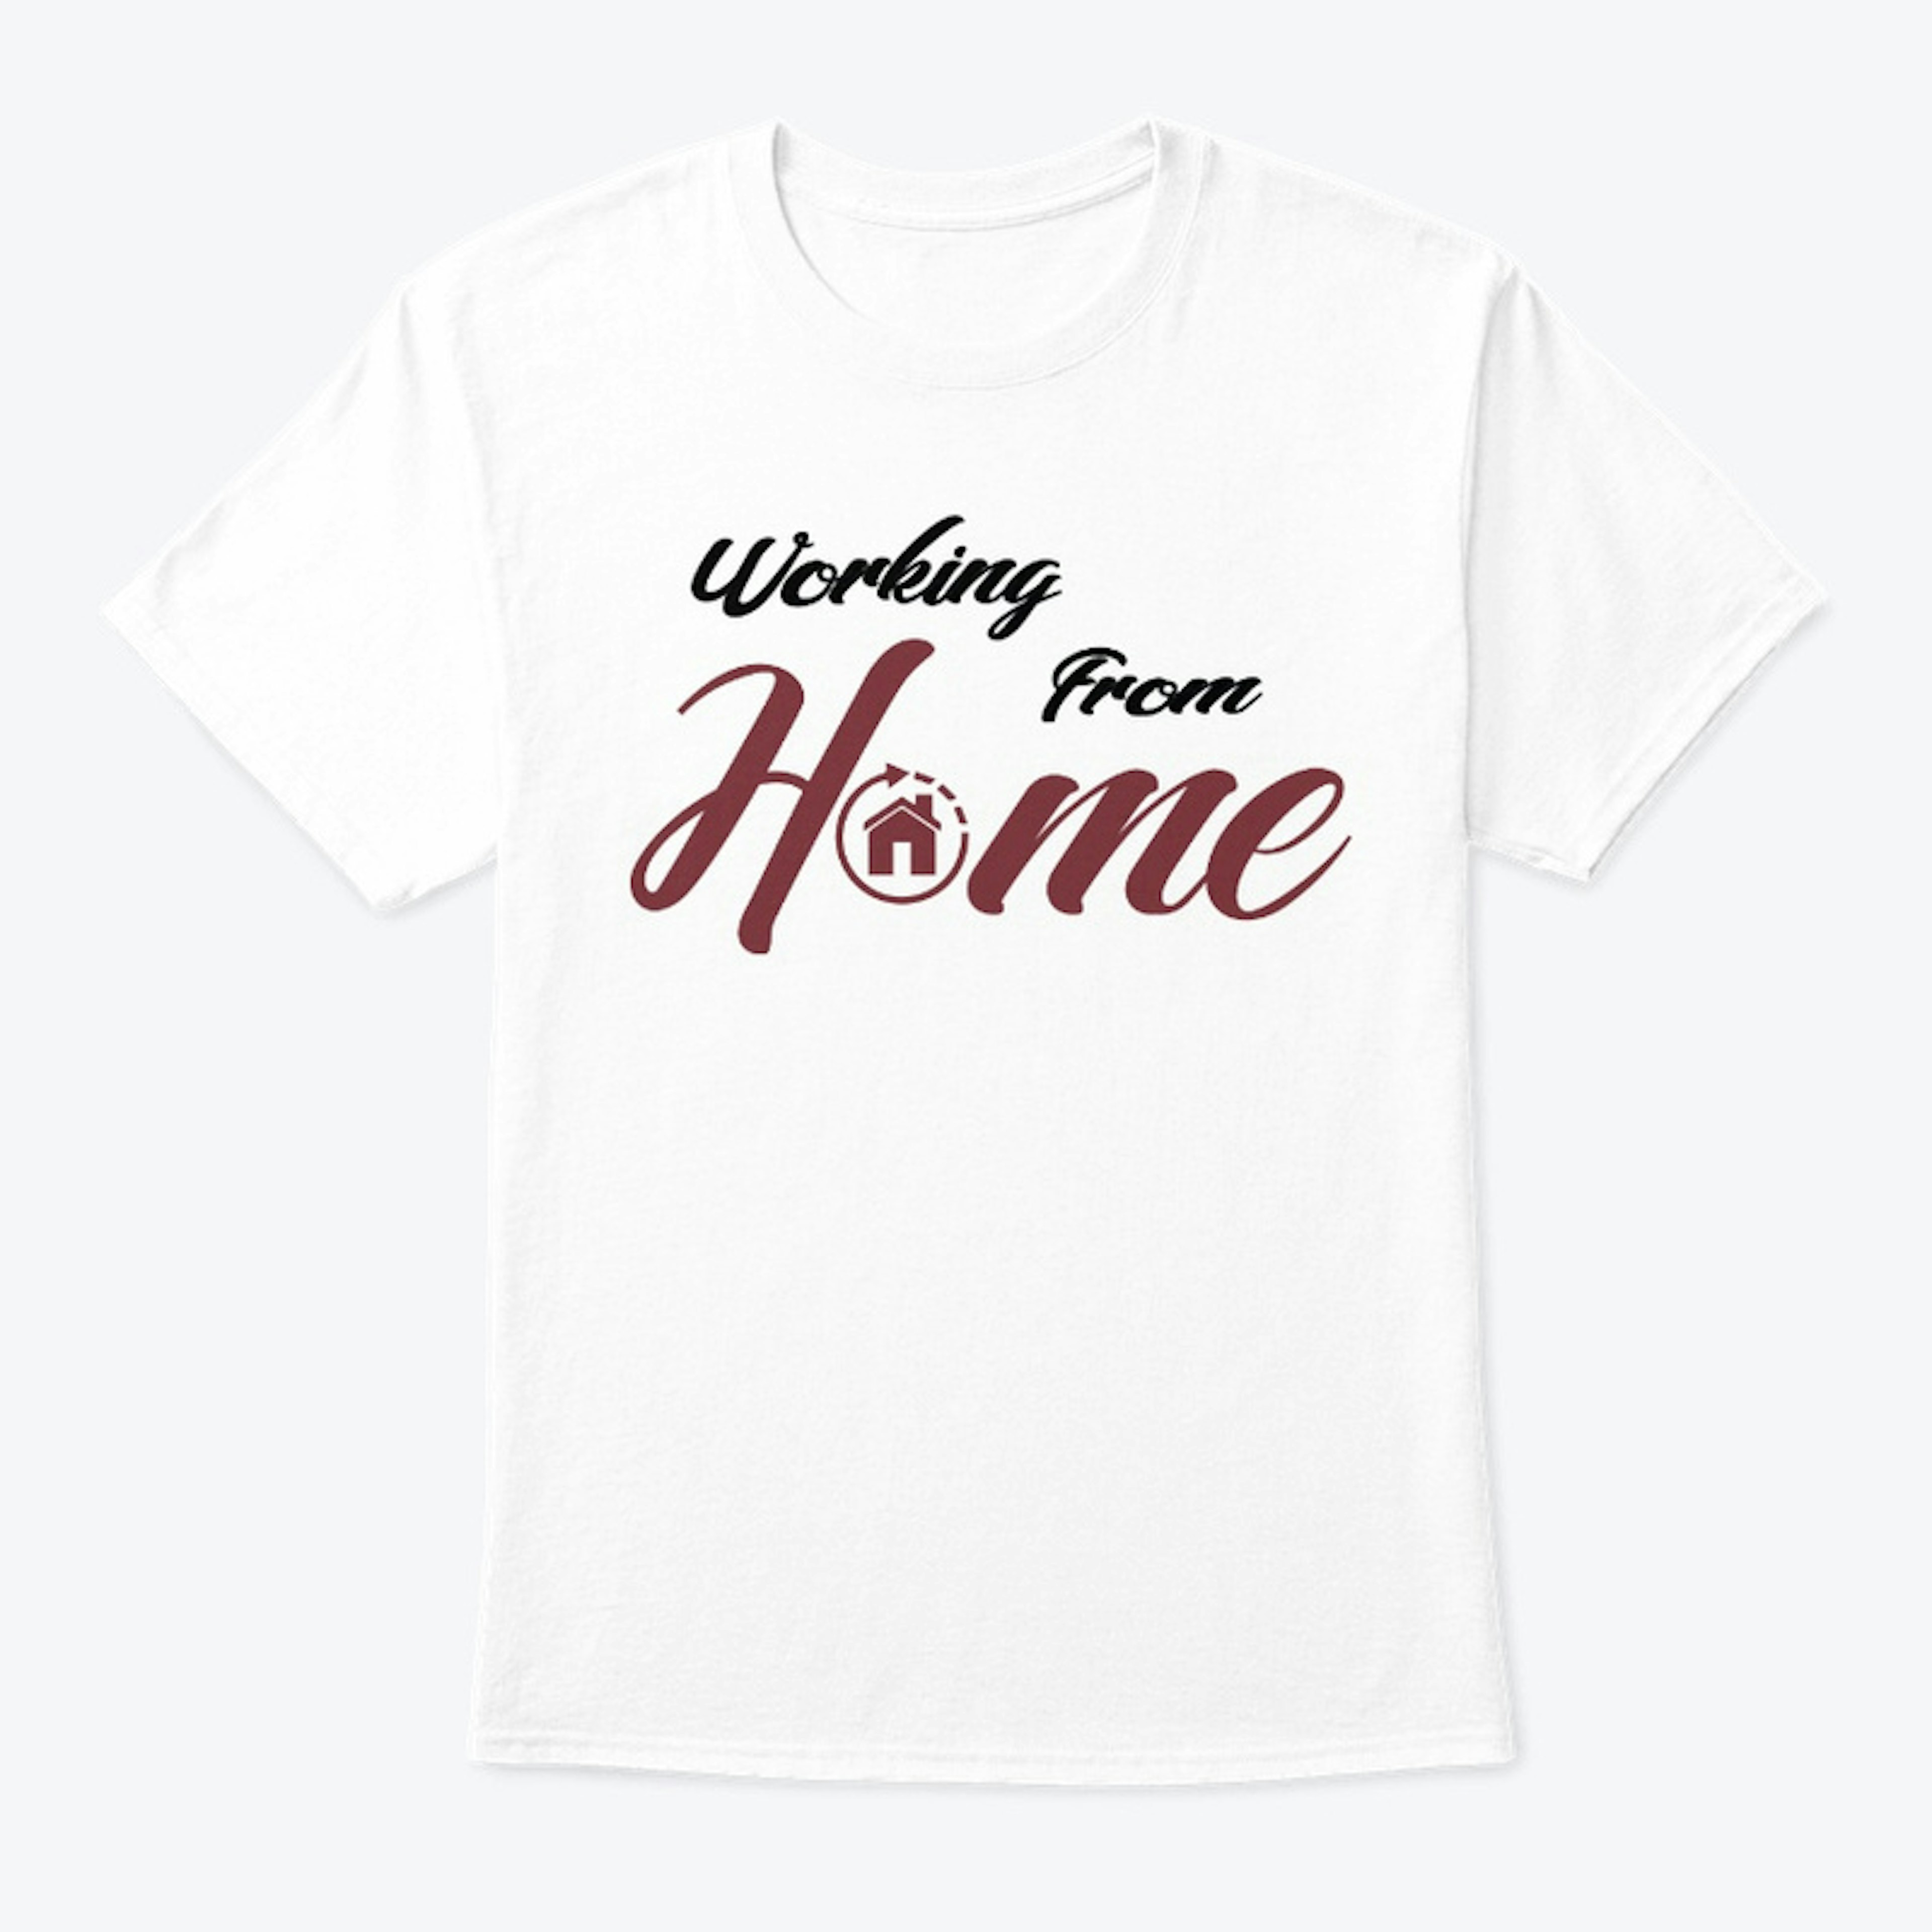 Your Work-From-Home Shirt